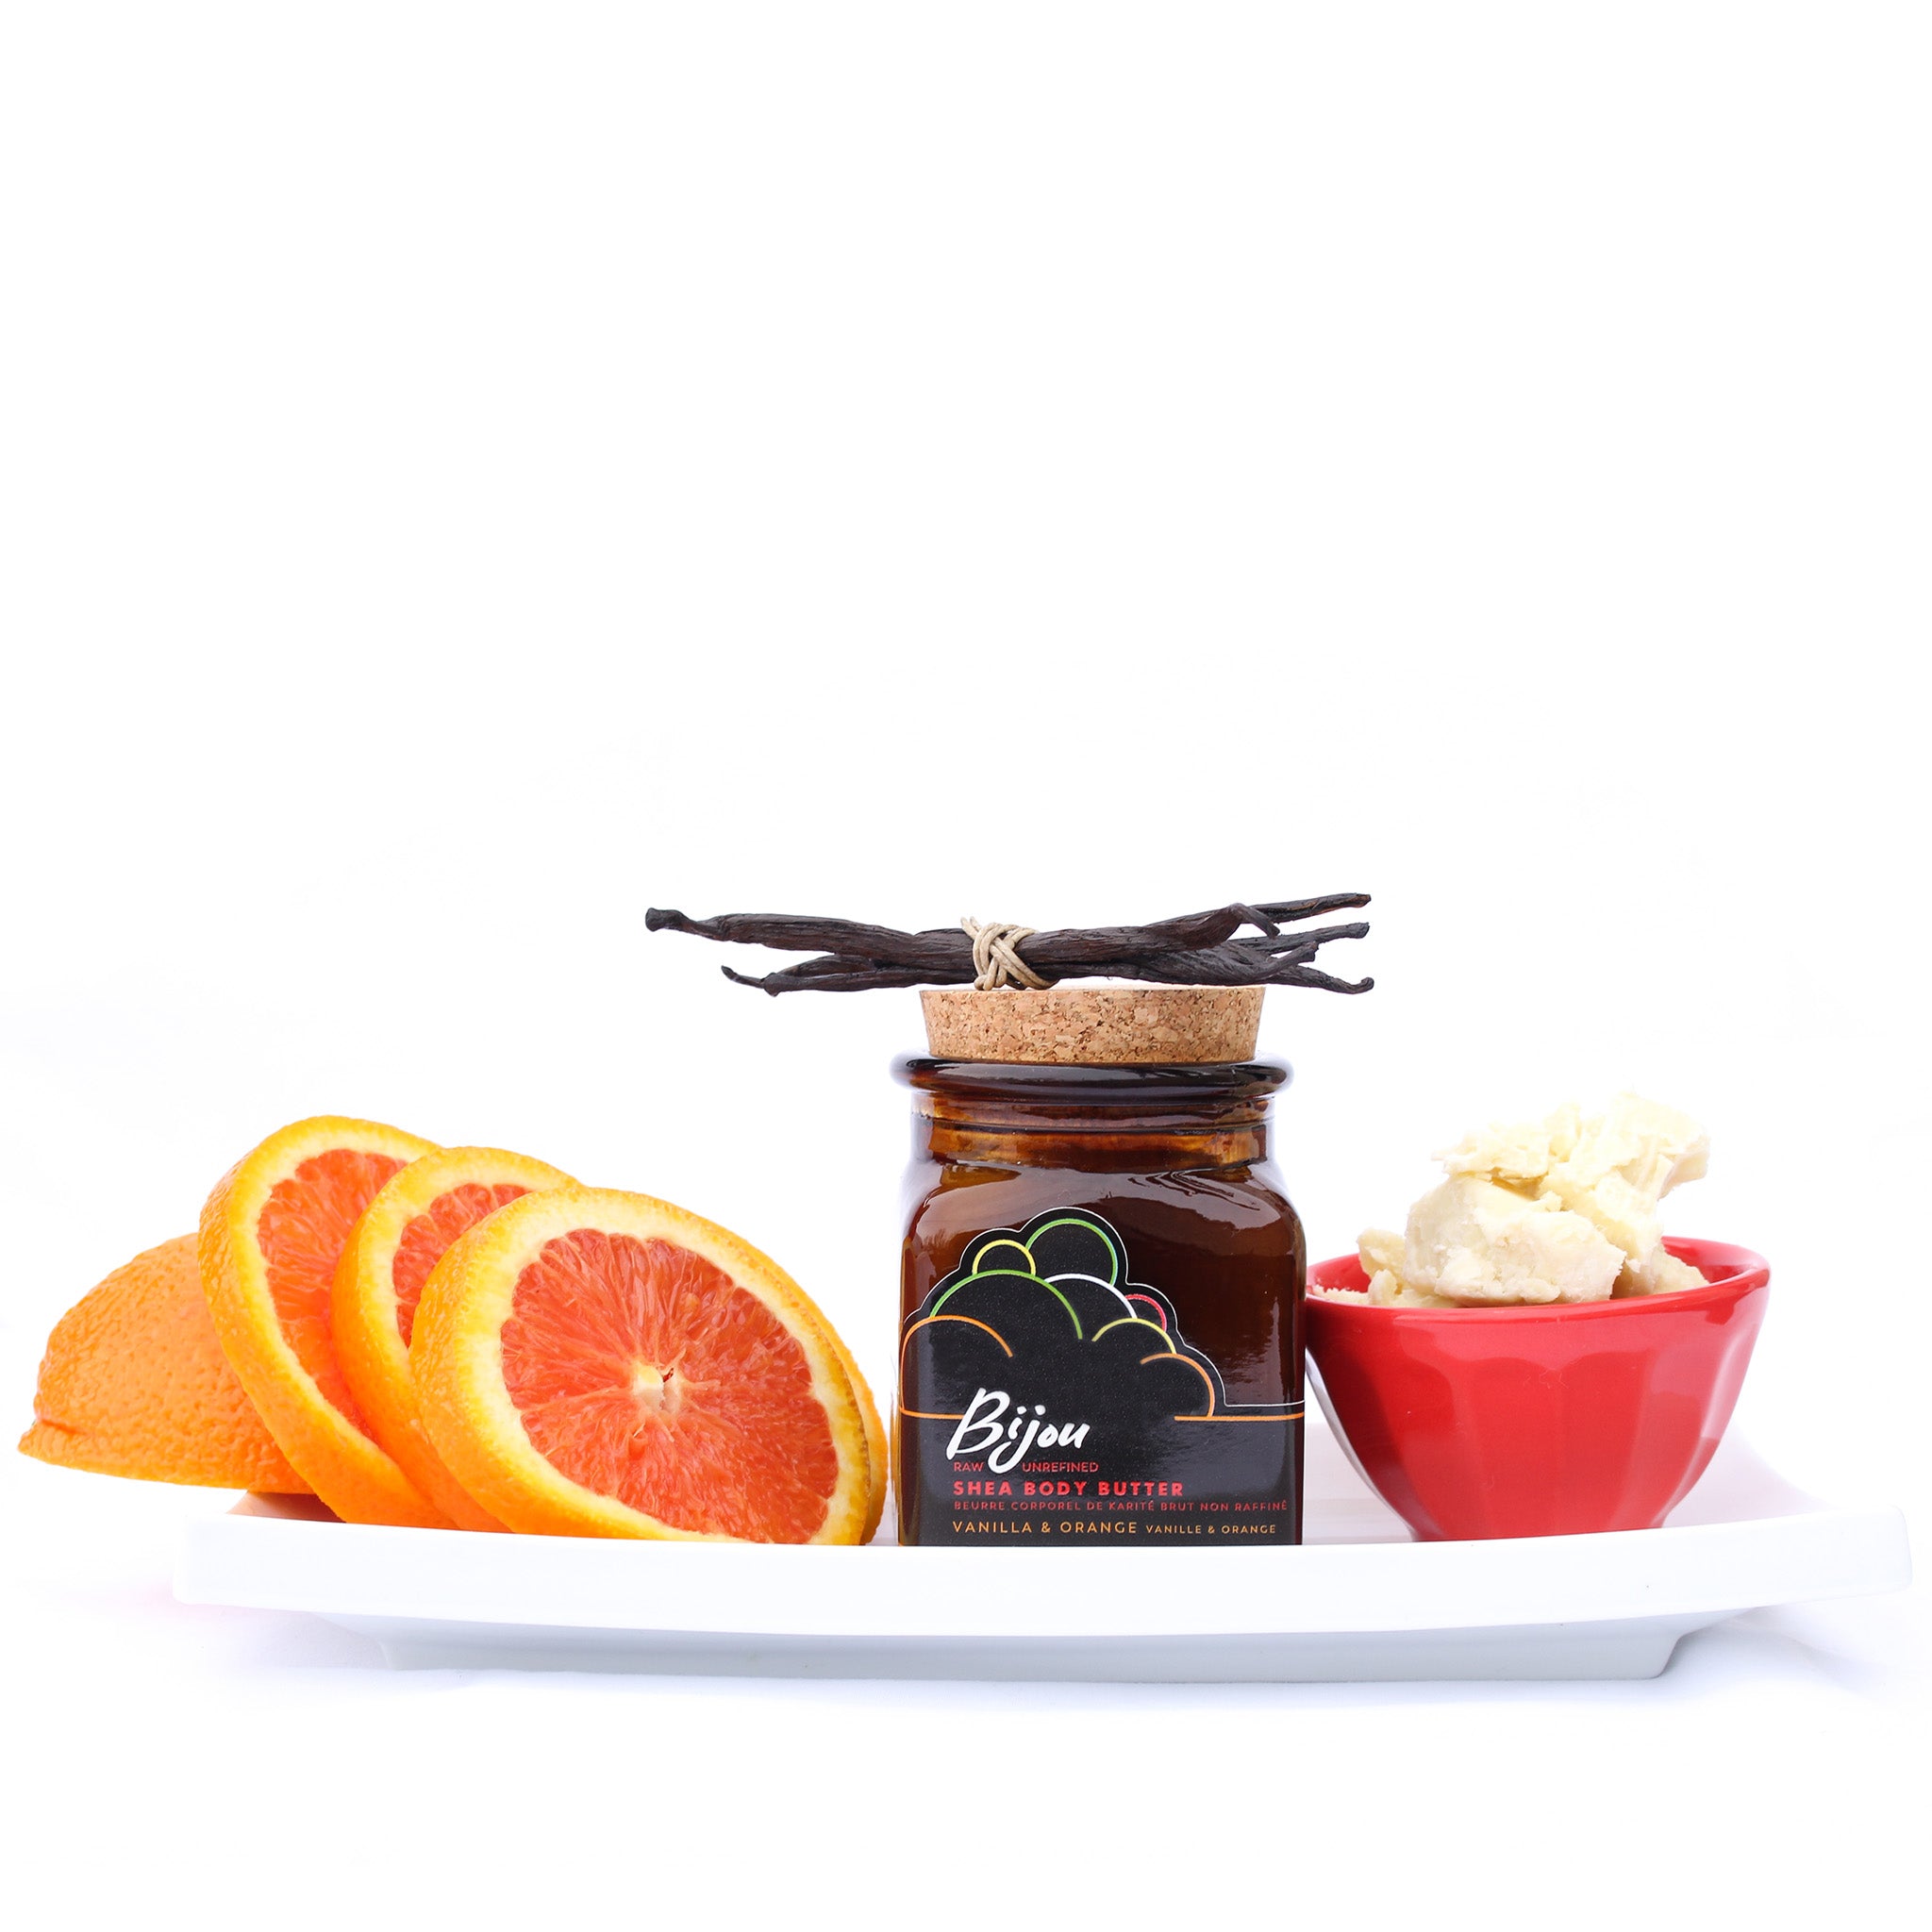 Bijou vanilla & orange shea body butter on a plate with slices of orange vanilla beans and shea butter